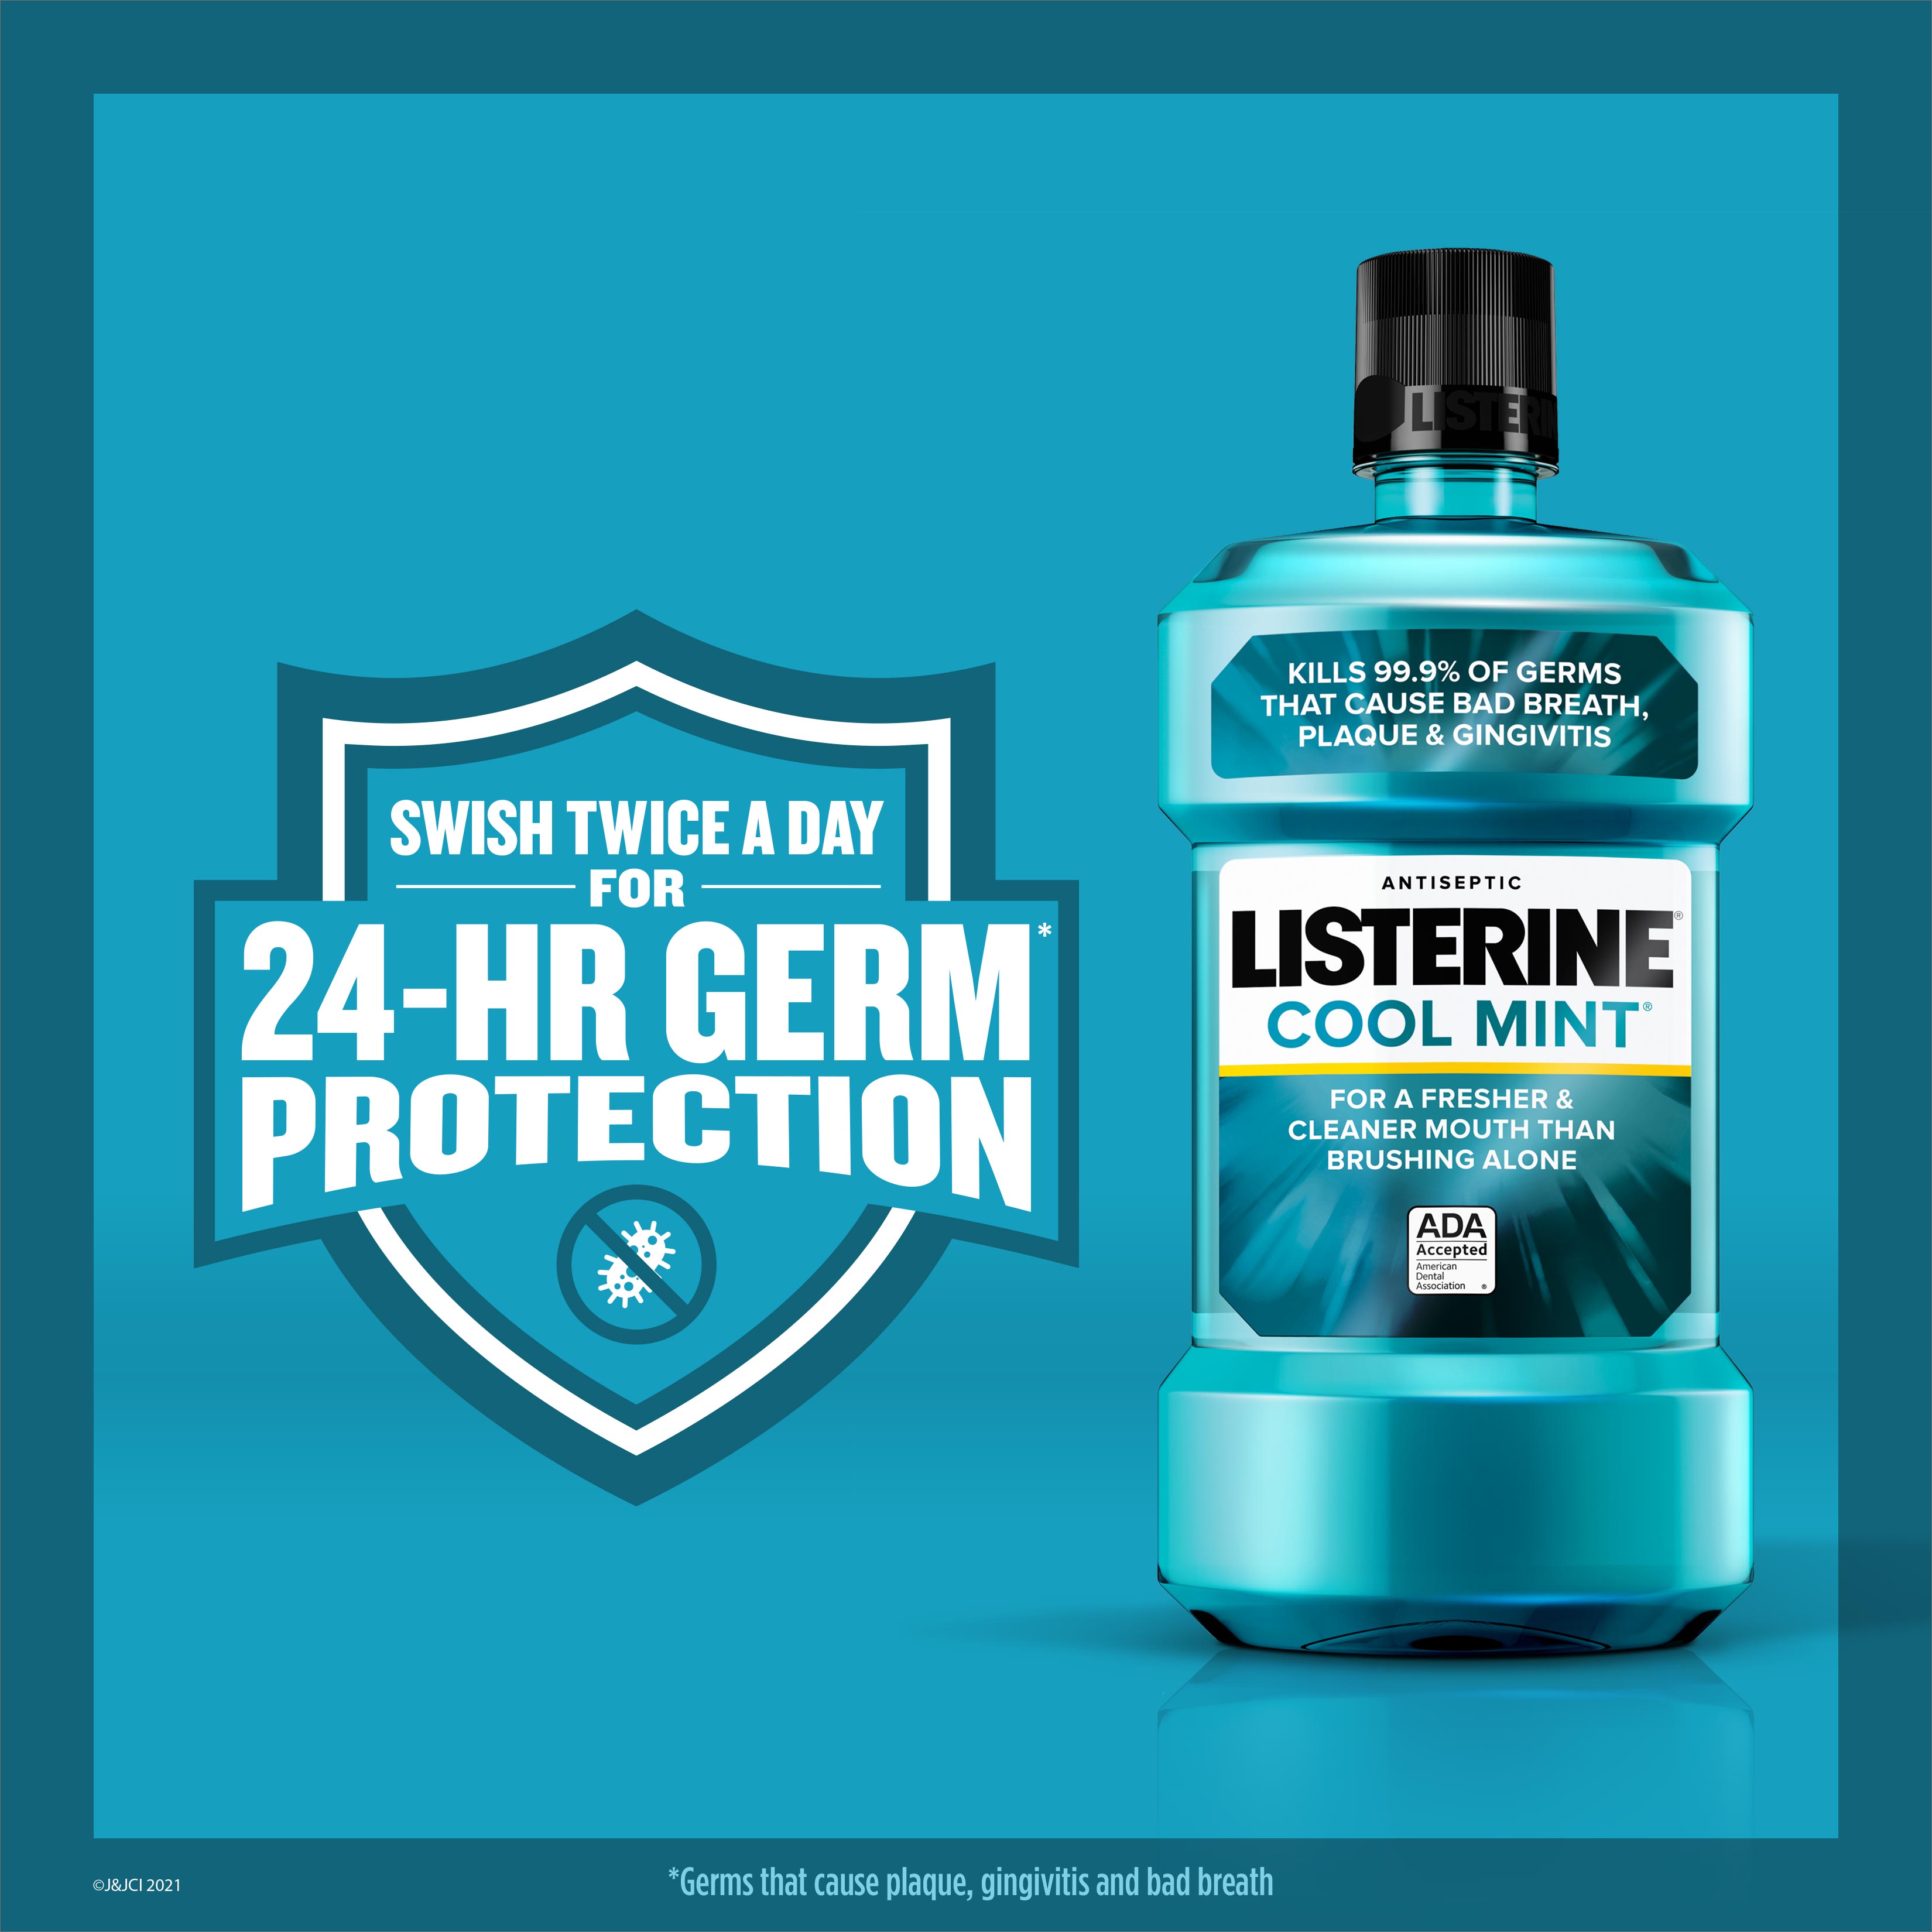 Listerine Cool Mint Antiseptic Mouthwash to Kill 99% of Germs That